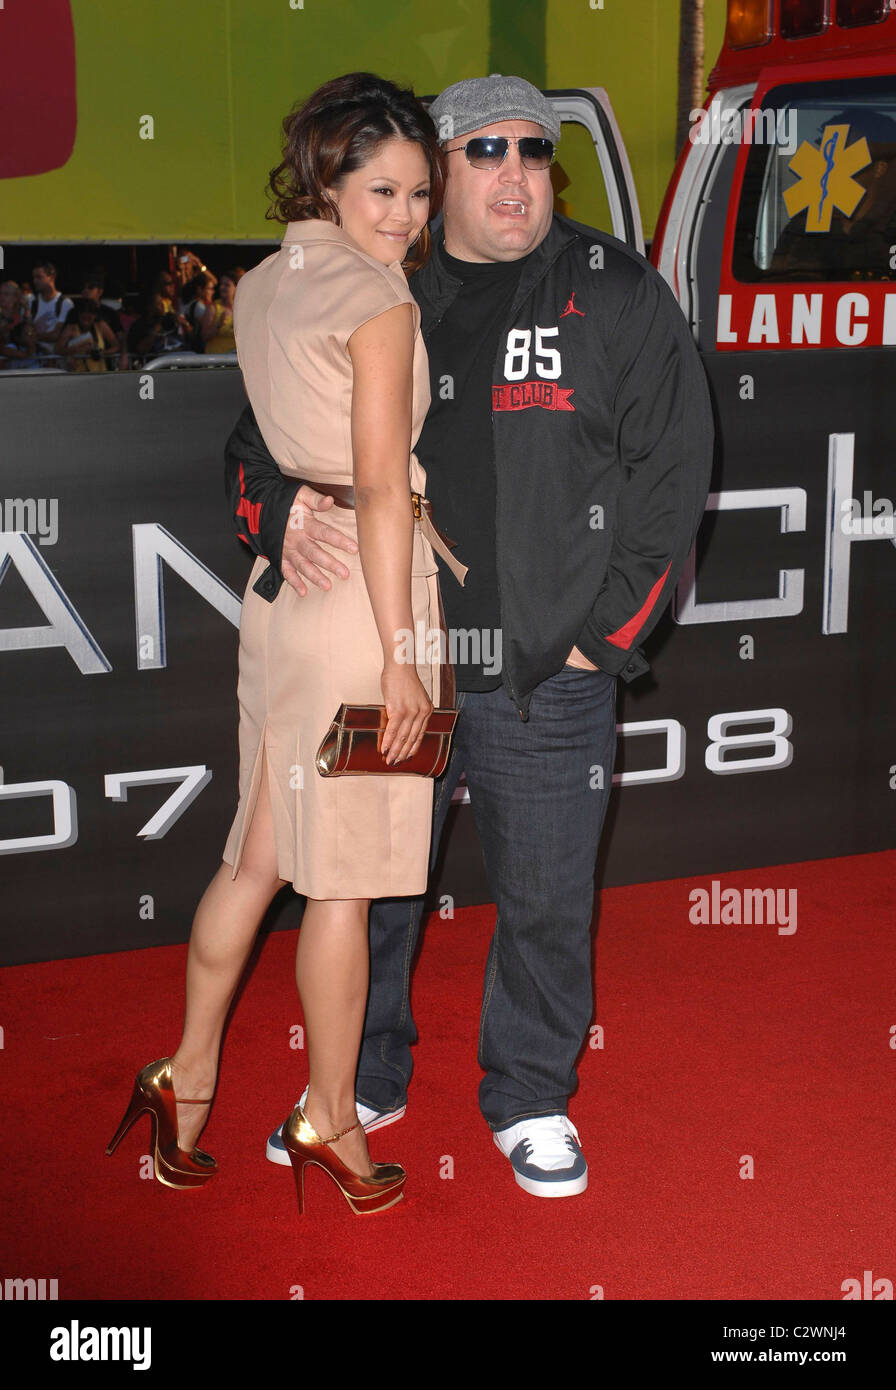 Kevin James and his wife Steffiana De La Cruz Los Angeles premiere of 'Hancock' held at the Grauman's Chinese Theatre - Stock Photo